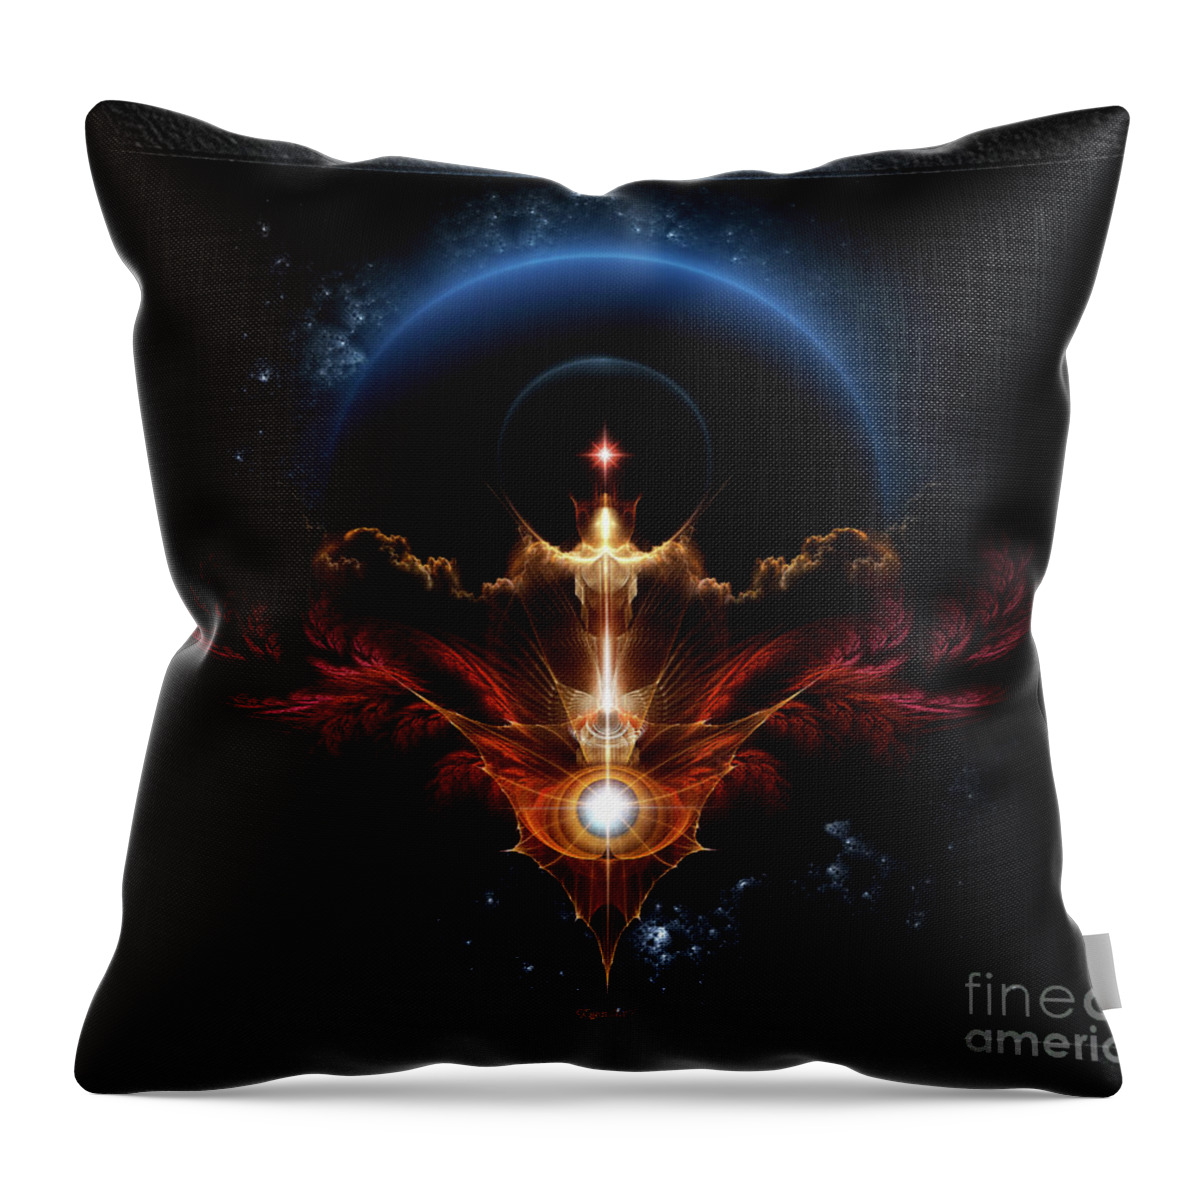 Wings Of Rydeon Throw Pillow featuring the digital art The Wings Of Rydeon Fractal Art Composition by Rolando Burbon